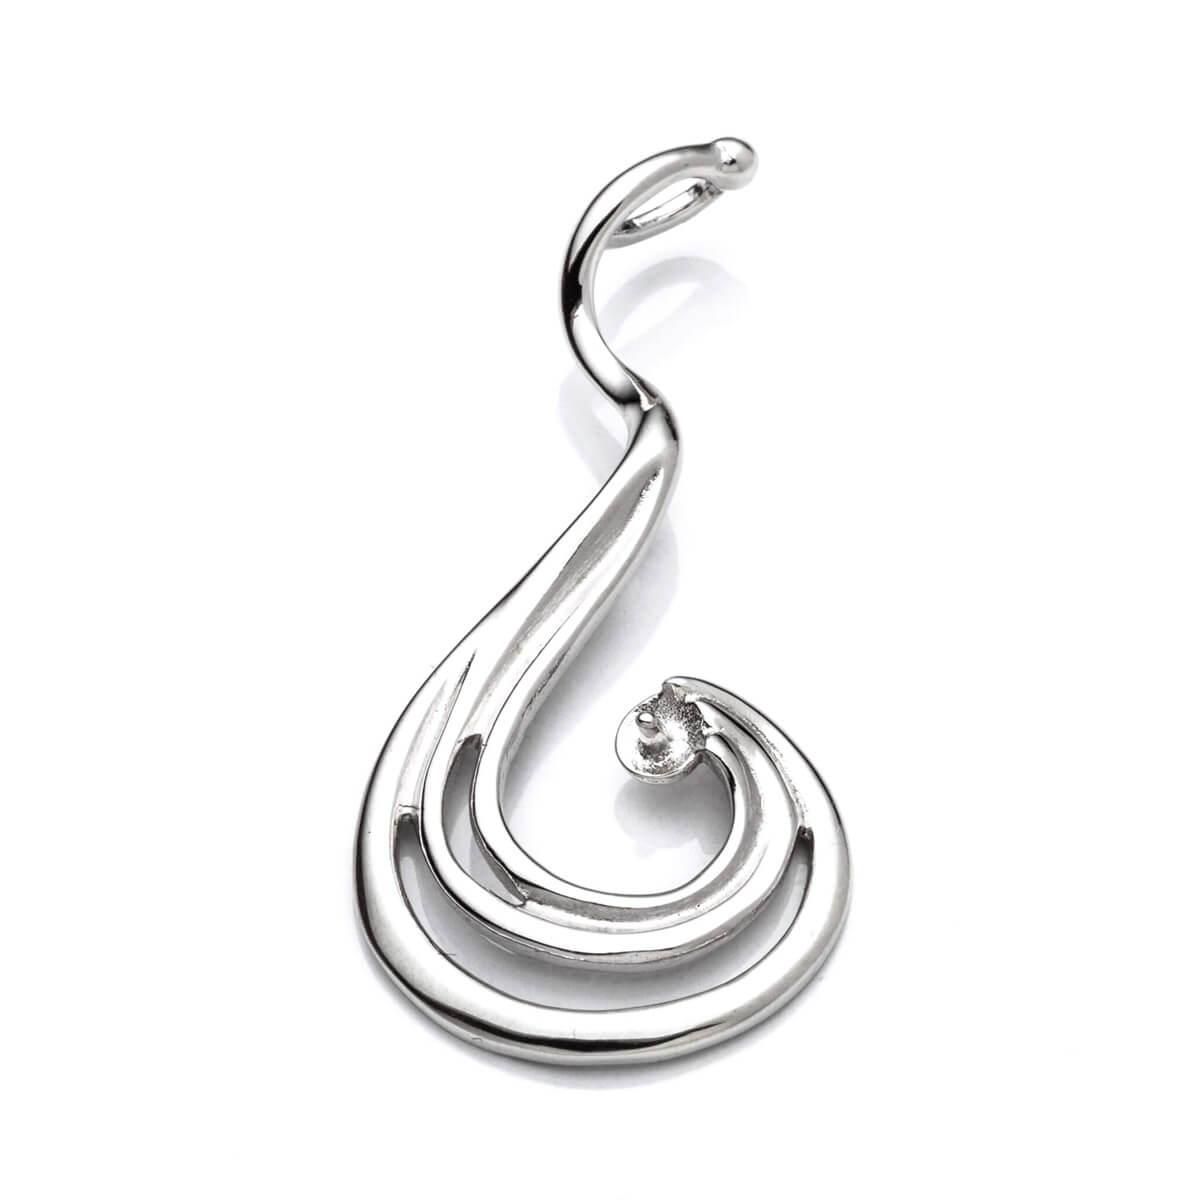 Hook Pendant with Cup and Peg Mounting in Sterling Silver 5mm